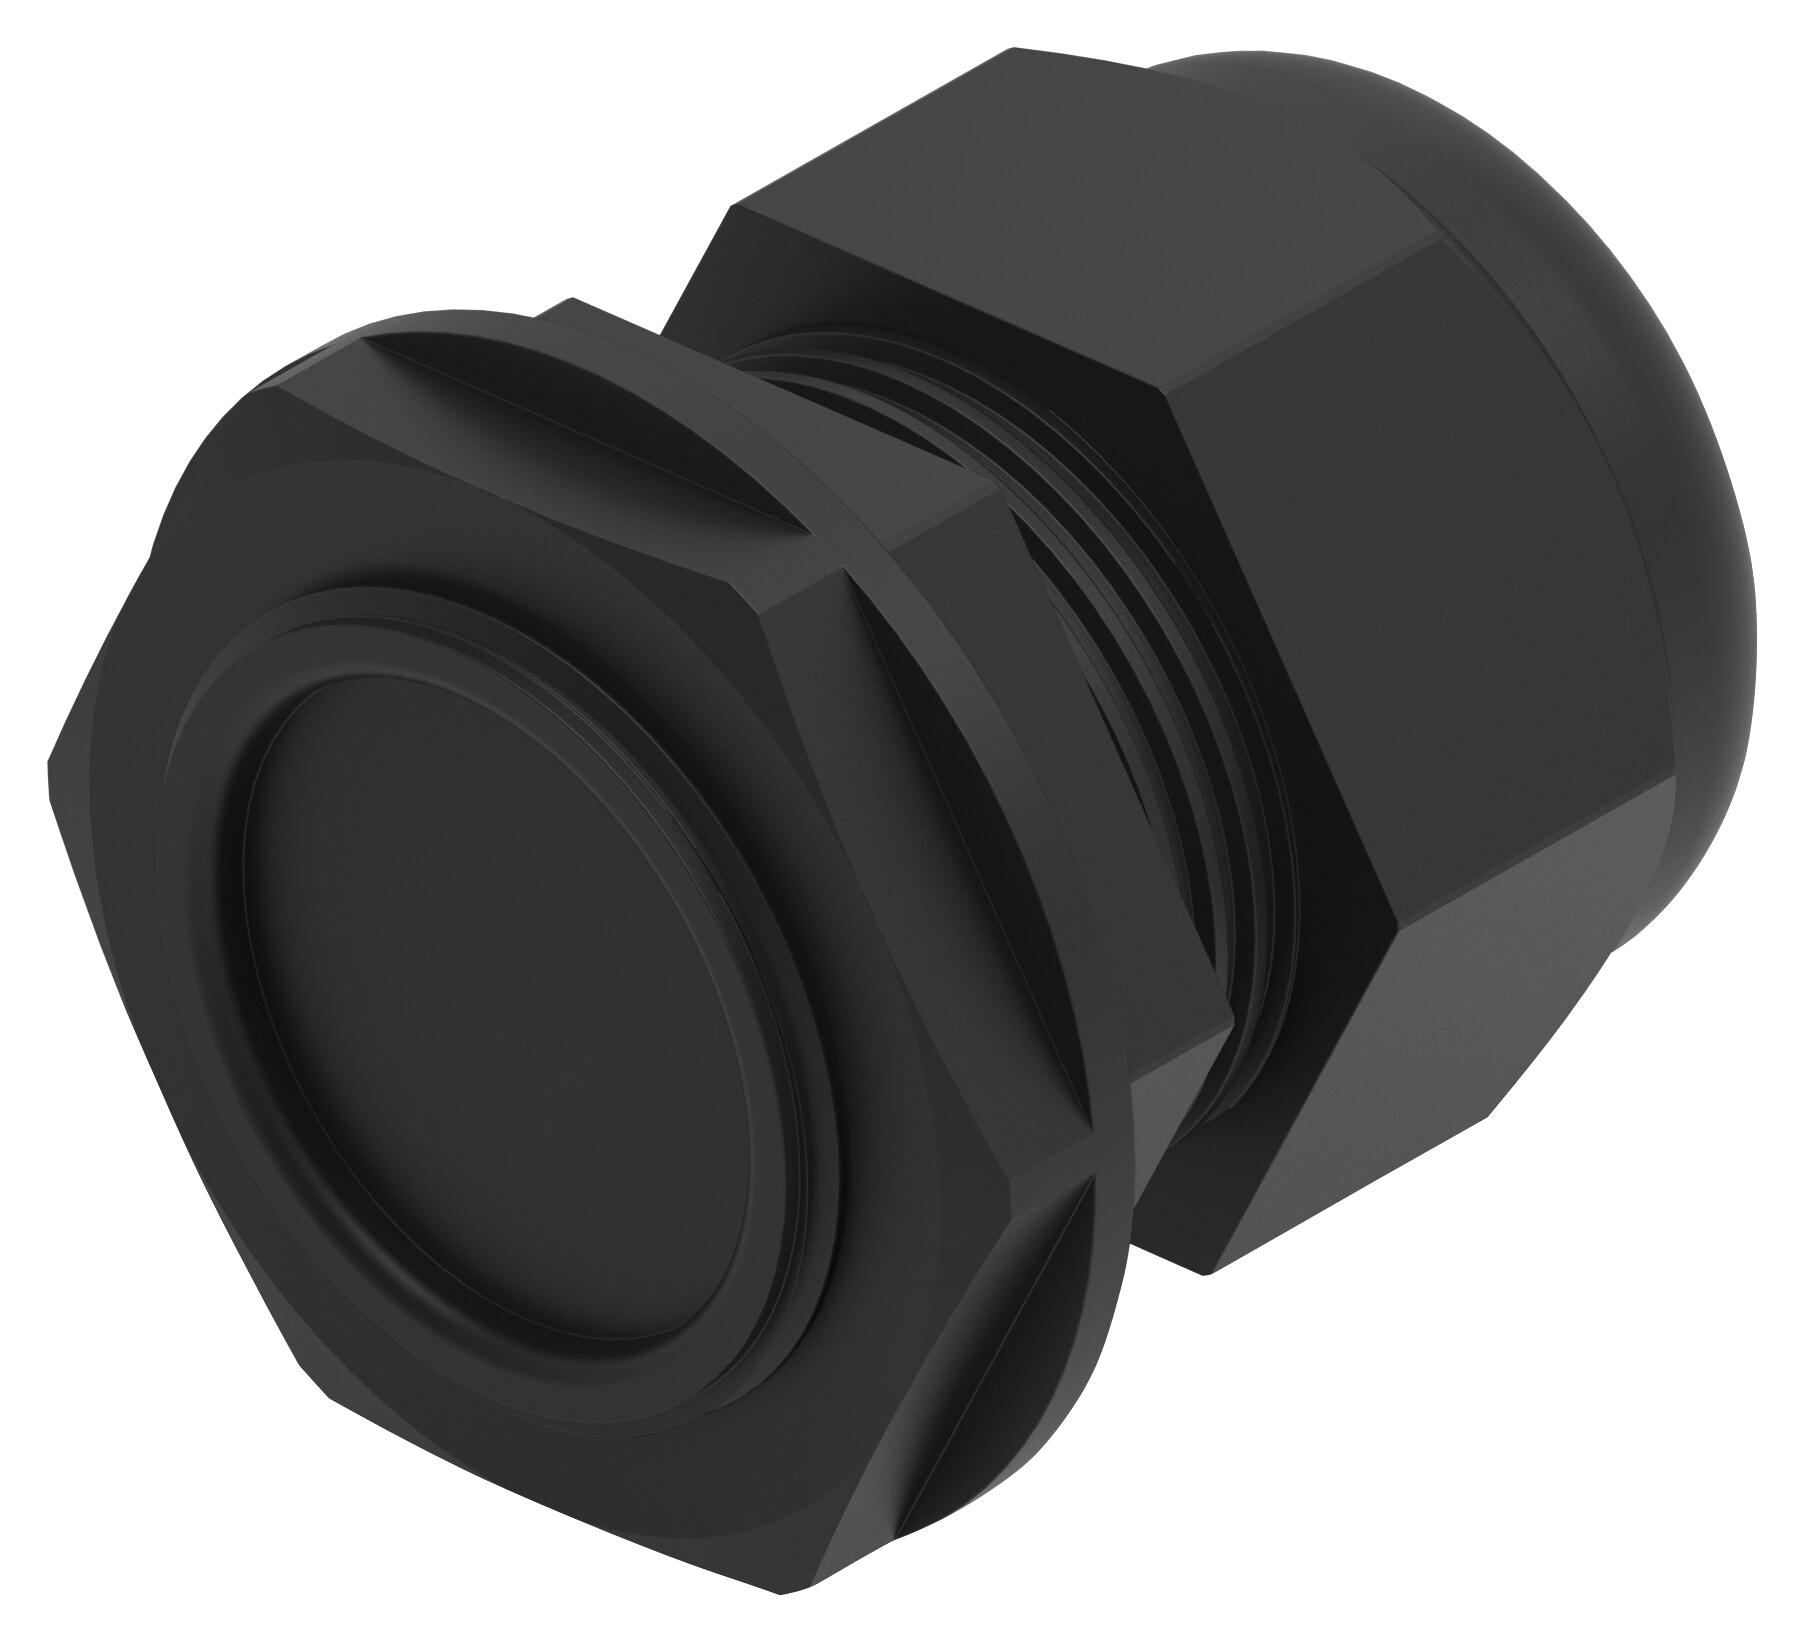 Entrelec TE Connectivity 1Sng626093R0000 Cable Gland, M32, 15mm-21mm, Ip66/ip68